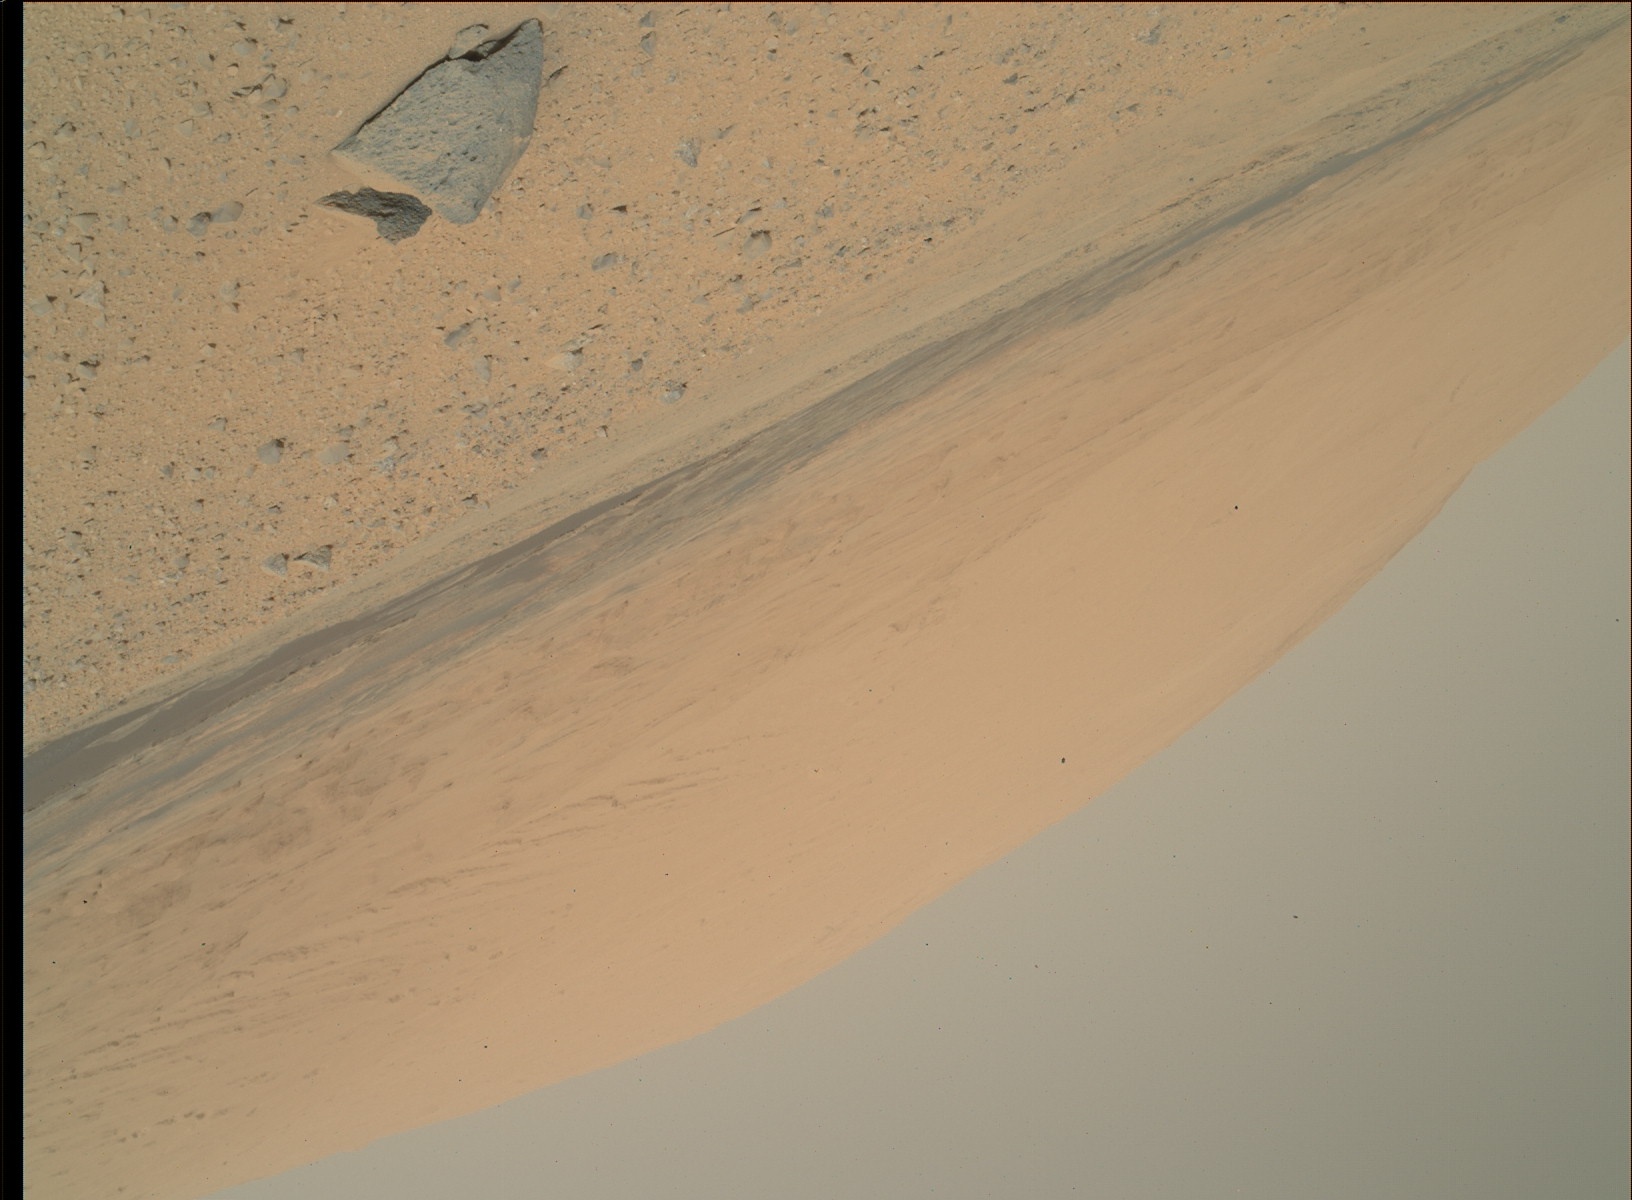 Nasa's Mars rover Curiosity acquired this image using its Mars Hand Lens Imager (MAHLI) on Sol 668